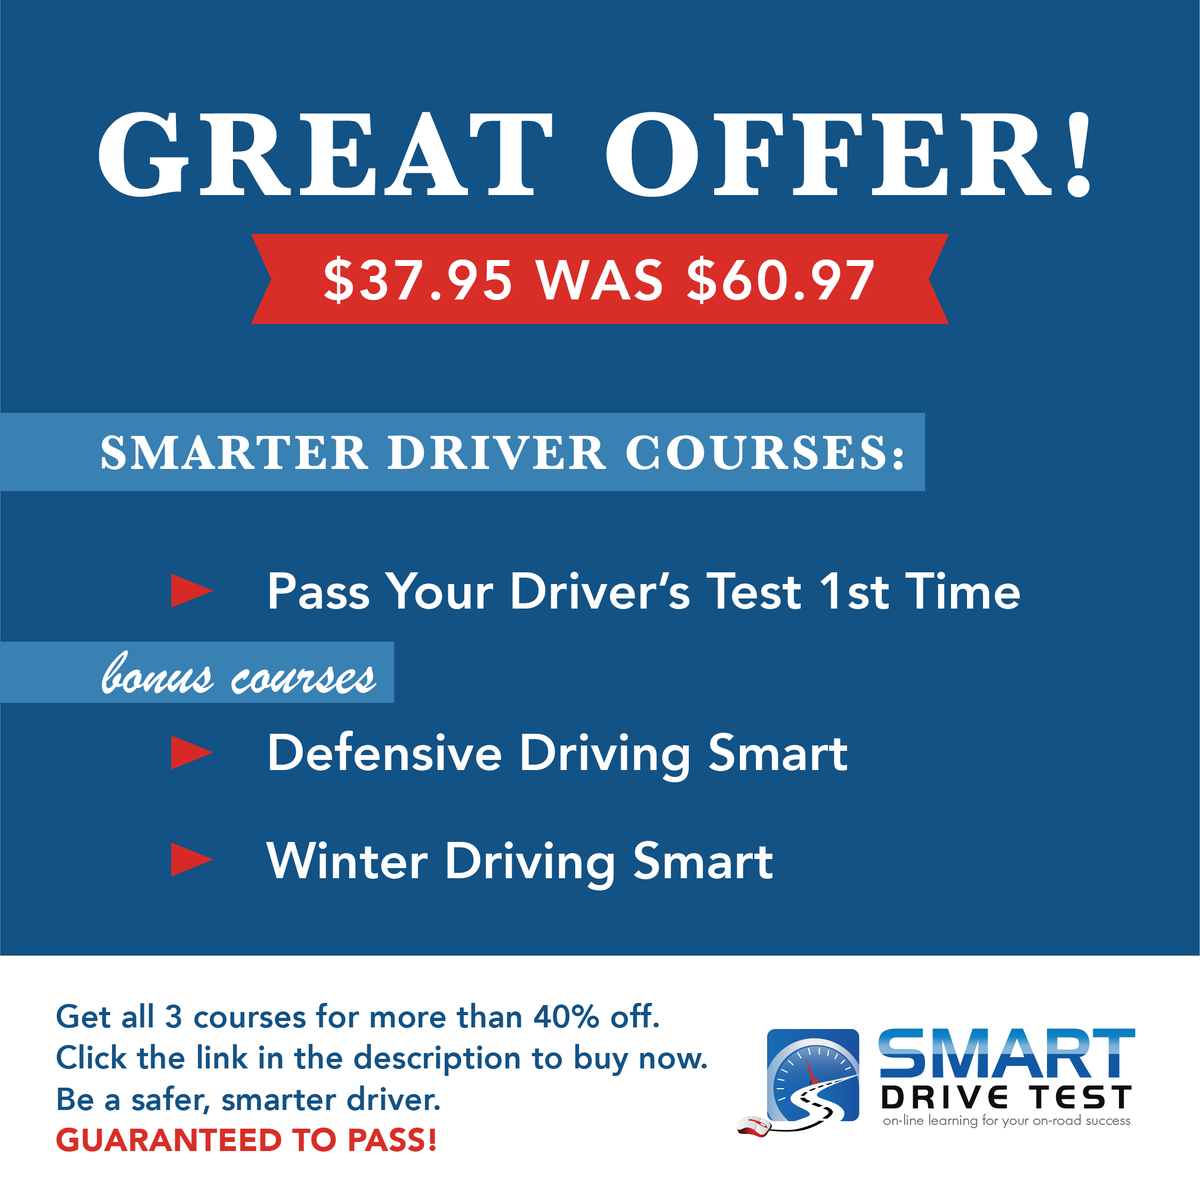 DON'T FAIL YOUR DRIVER'S TEST COURSE PKG
smartdrivetest.com/new-drivers/sm…
We include as a bonus both the winter and defensive driving in the above course package.

#driving #drivingschool #drivingtest #drivingtestsuccess #drivingtestpassed #drivingperformance #drivinglessons